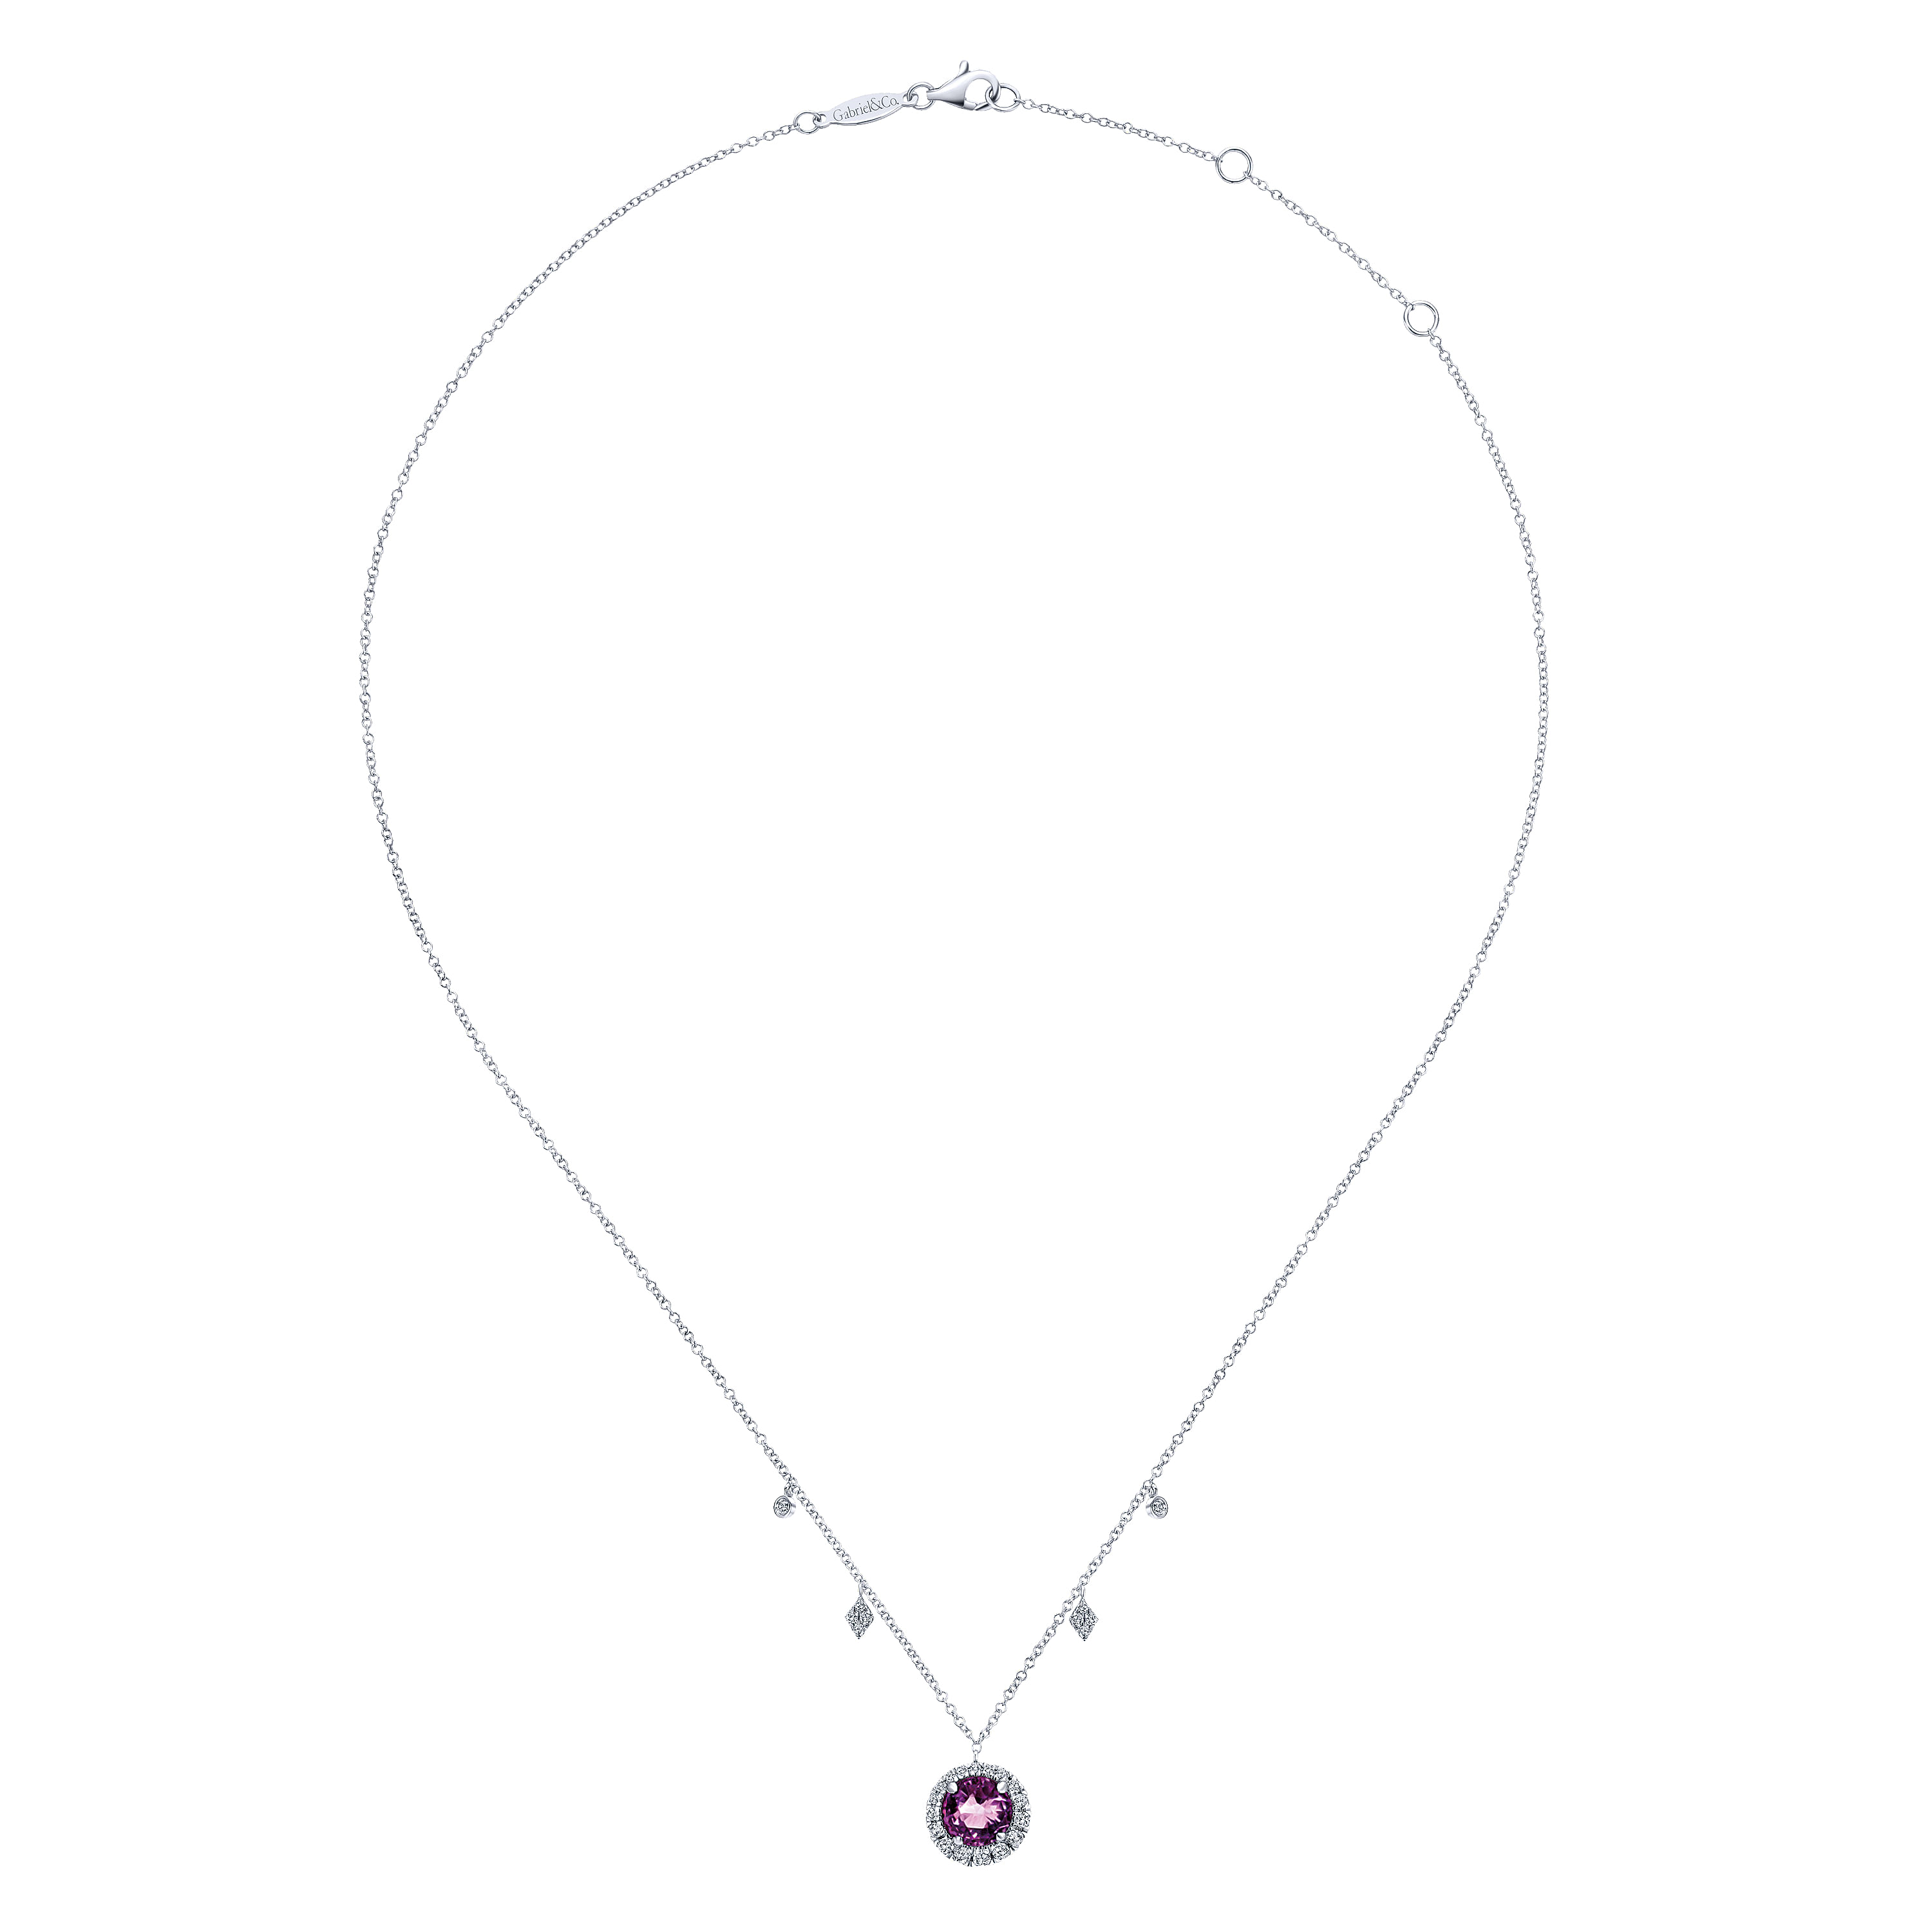 14K White Gold Round Amethyst and Diamond Halo Pendant Necklace with Side Drops